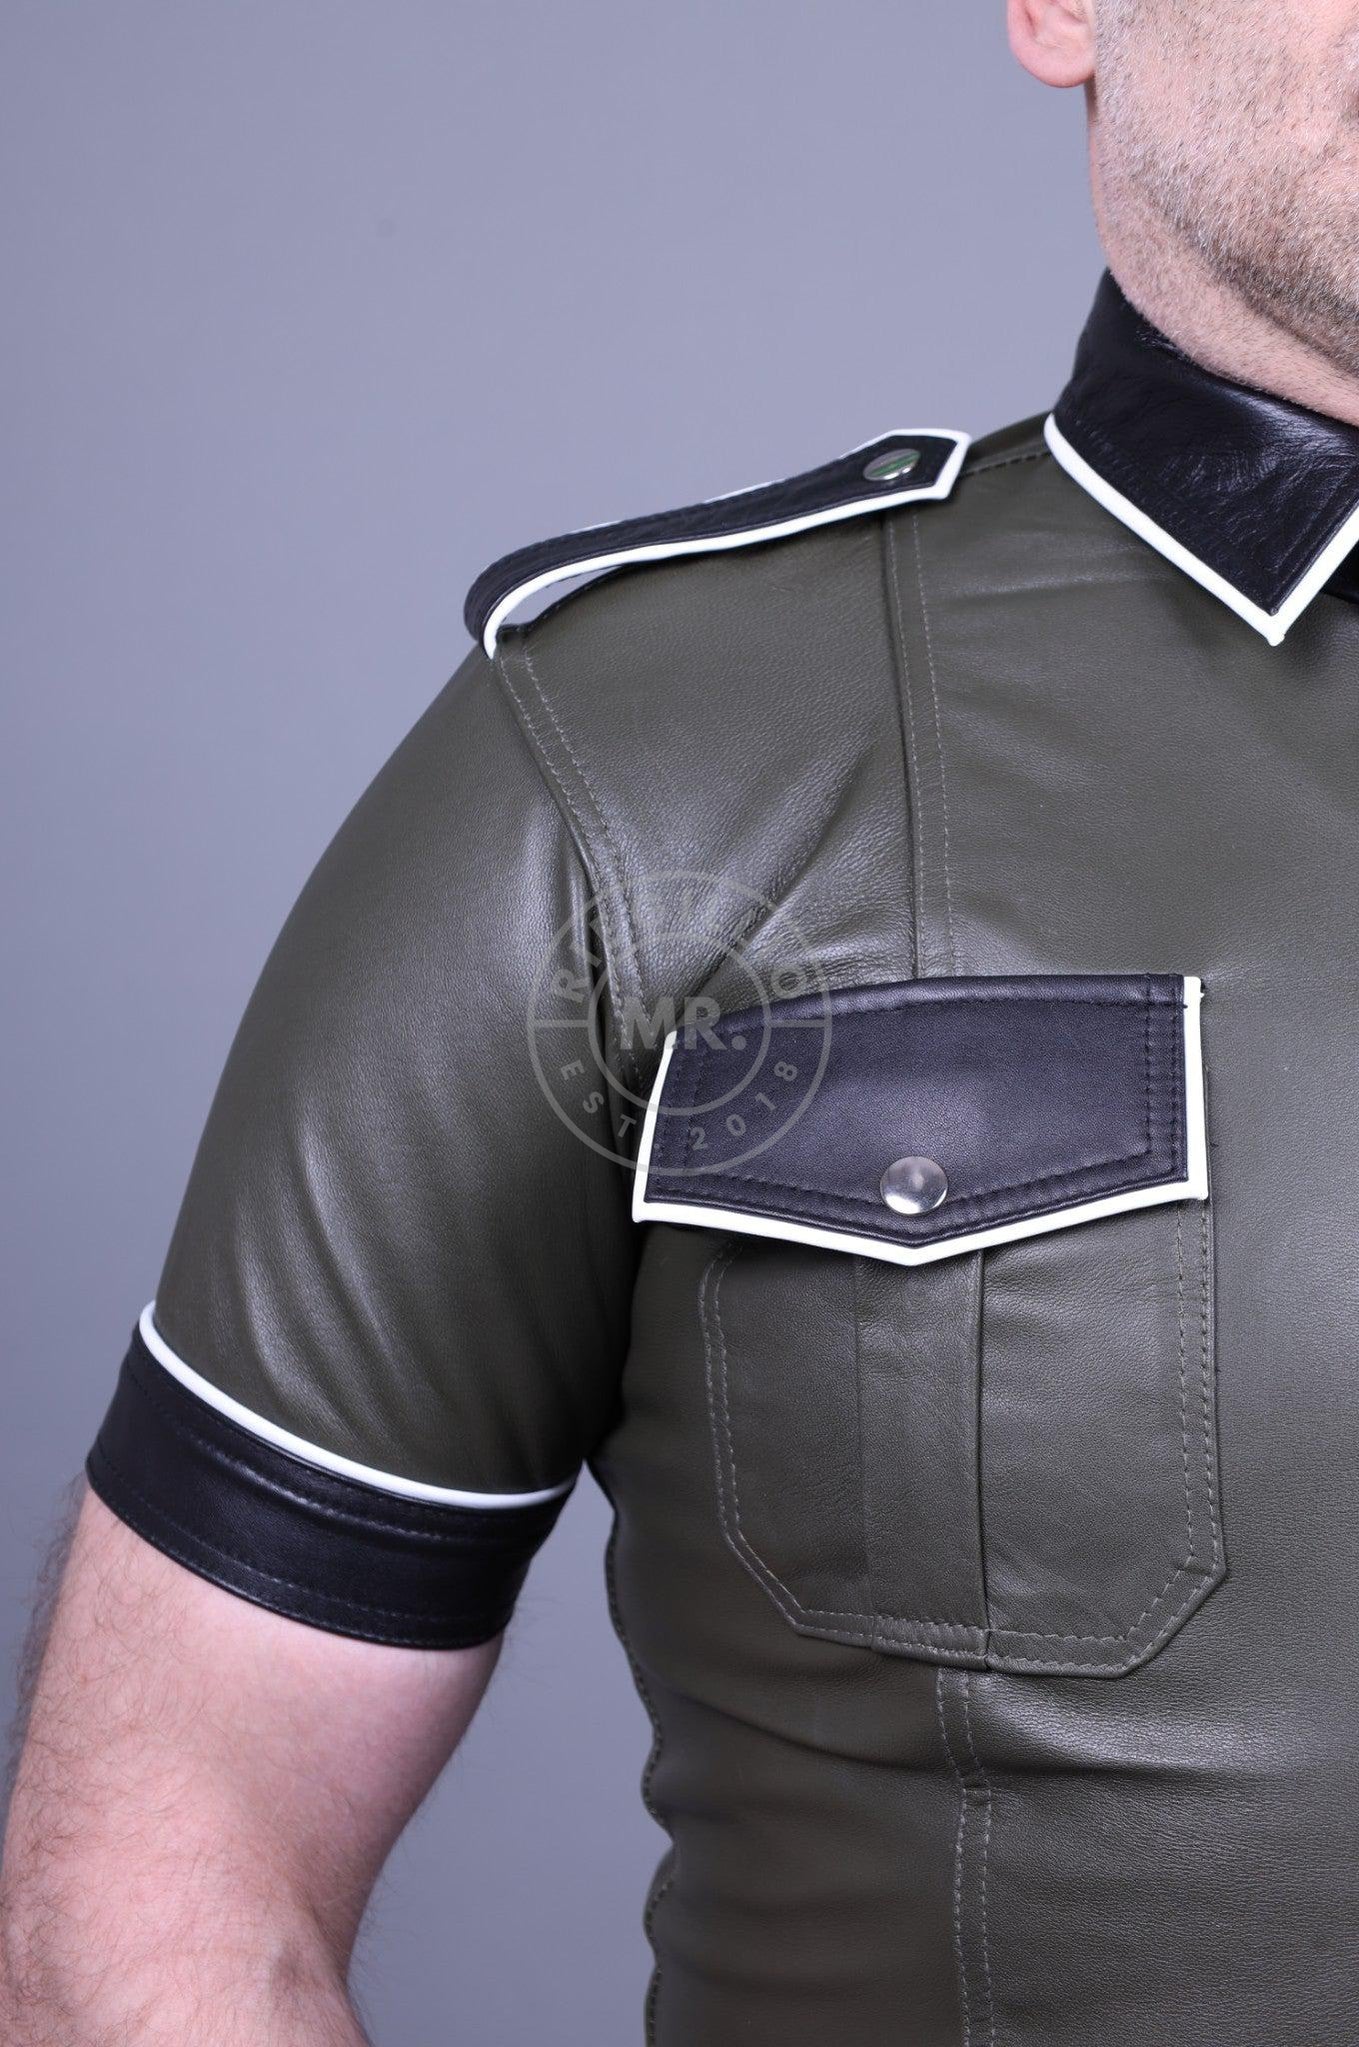 Colored Leather Shirt - Army Green at MR. Riegillio